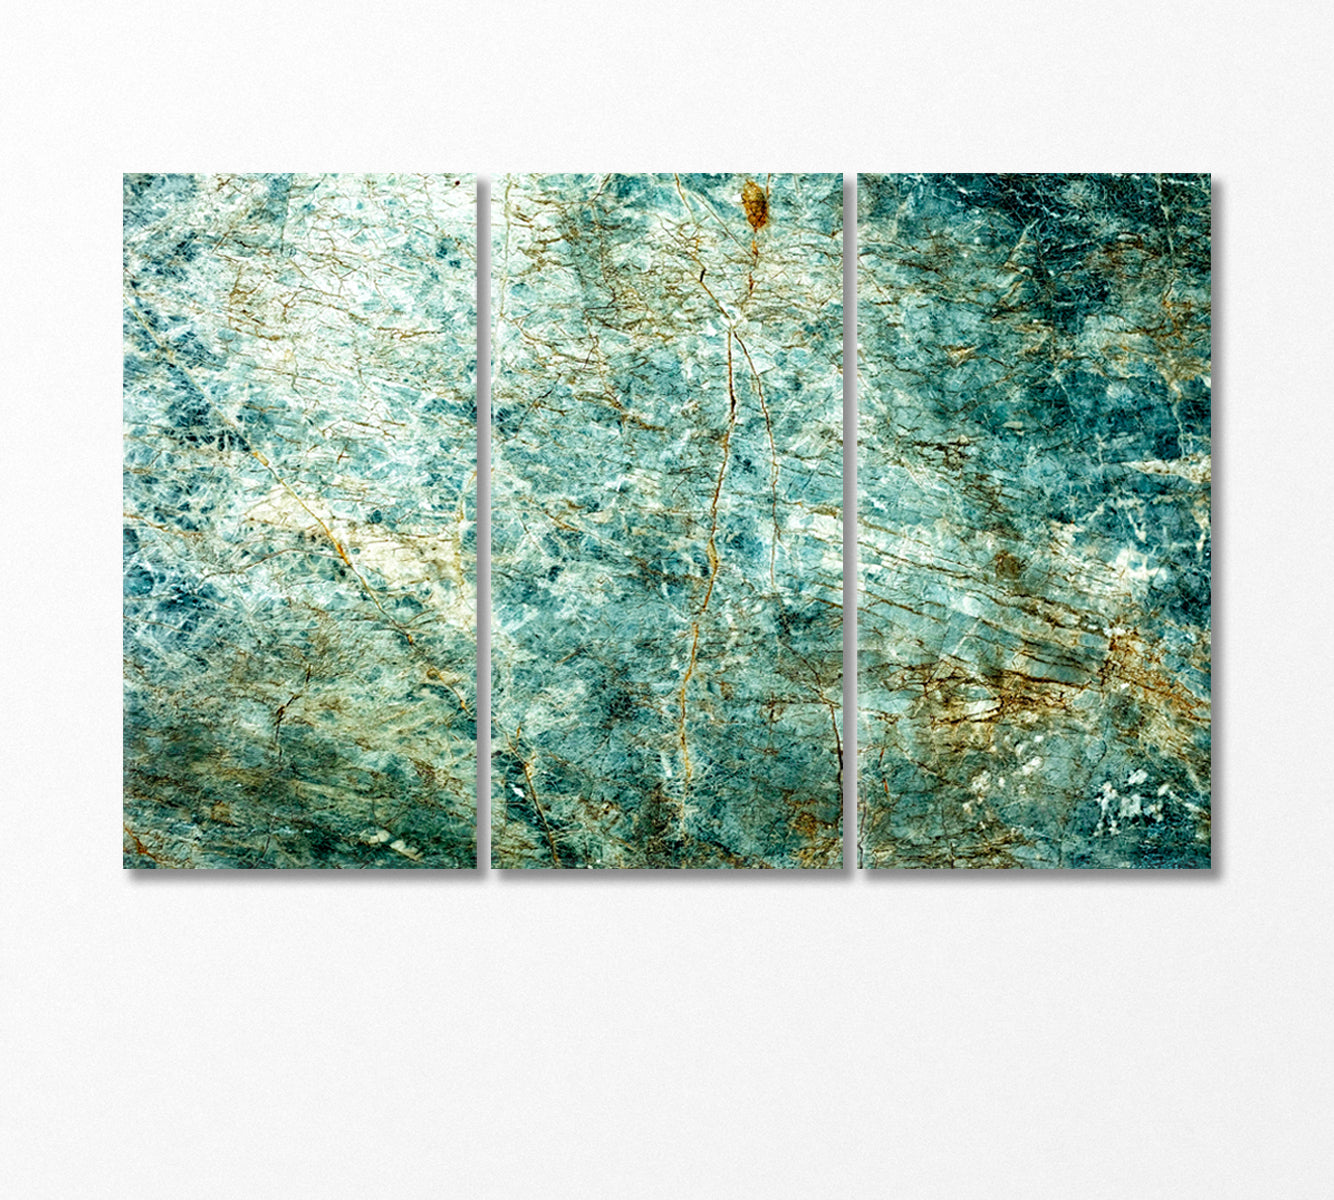 Abstract Old Stone Wall with Cracks Canvas Print-Canvas Print-CetArt-3 Panels-36x24 inches-CetArt